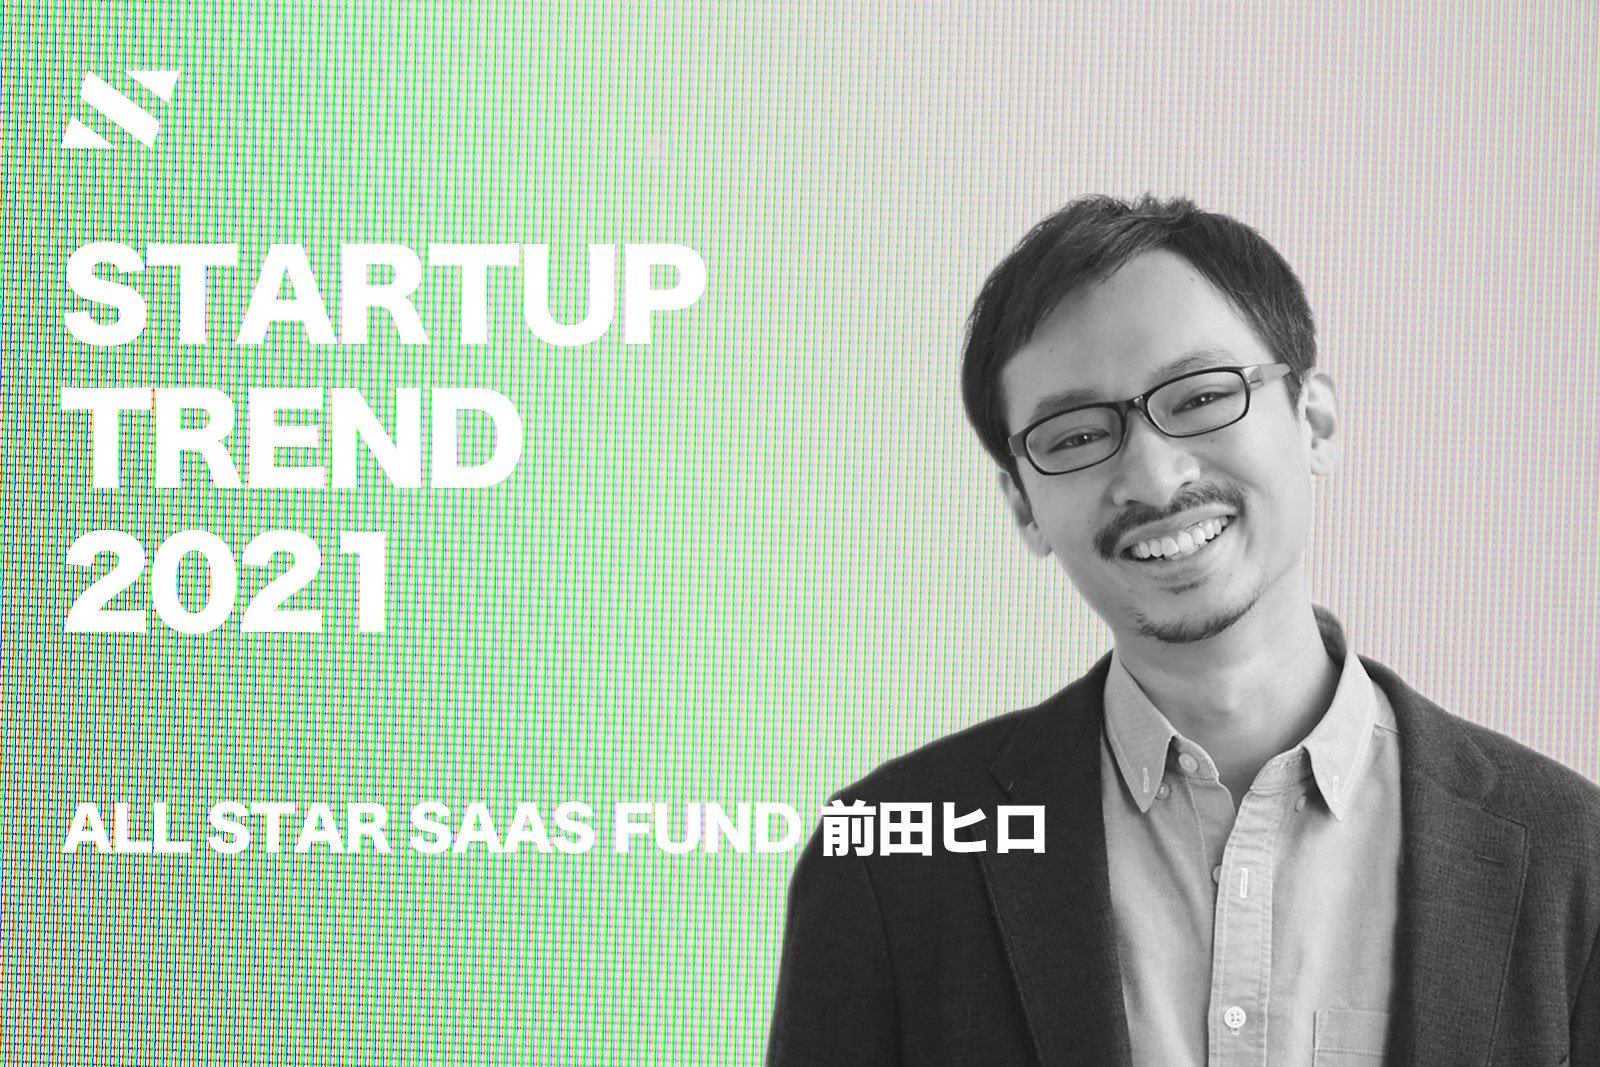 ALL STAR SAAS FUNDマネージングパートナー 前田ヒロ氏